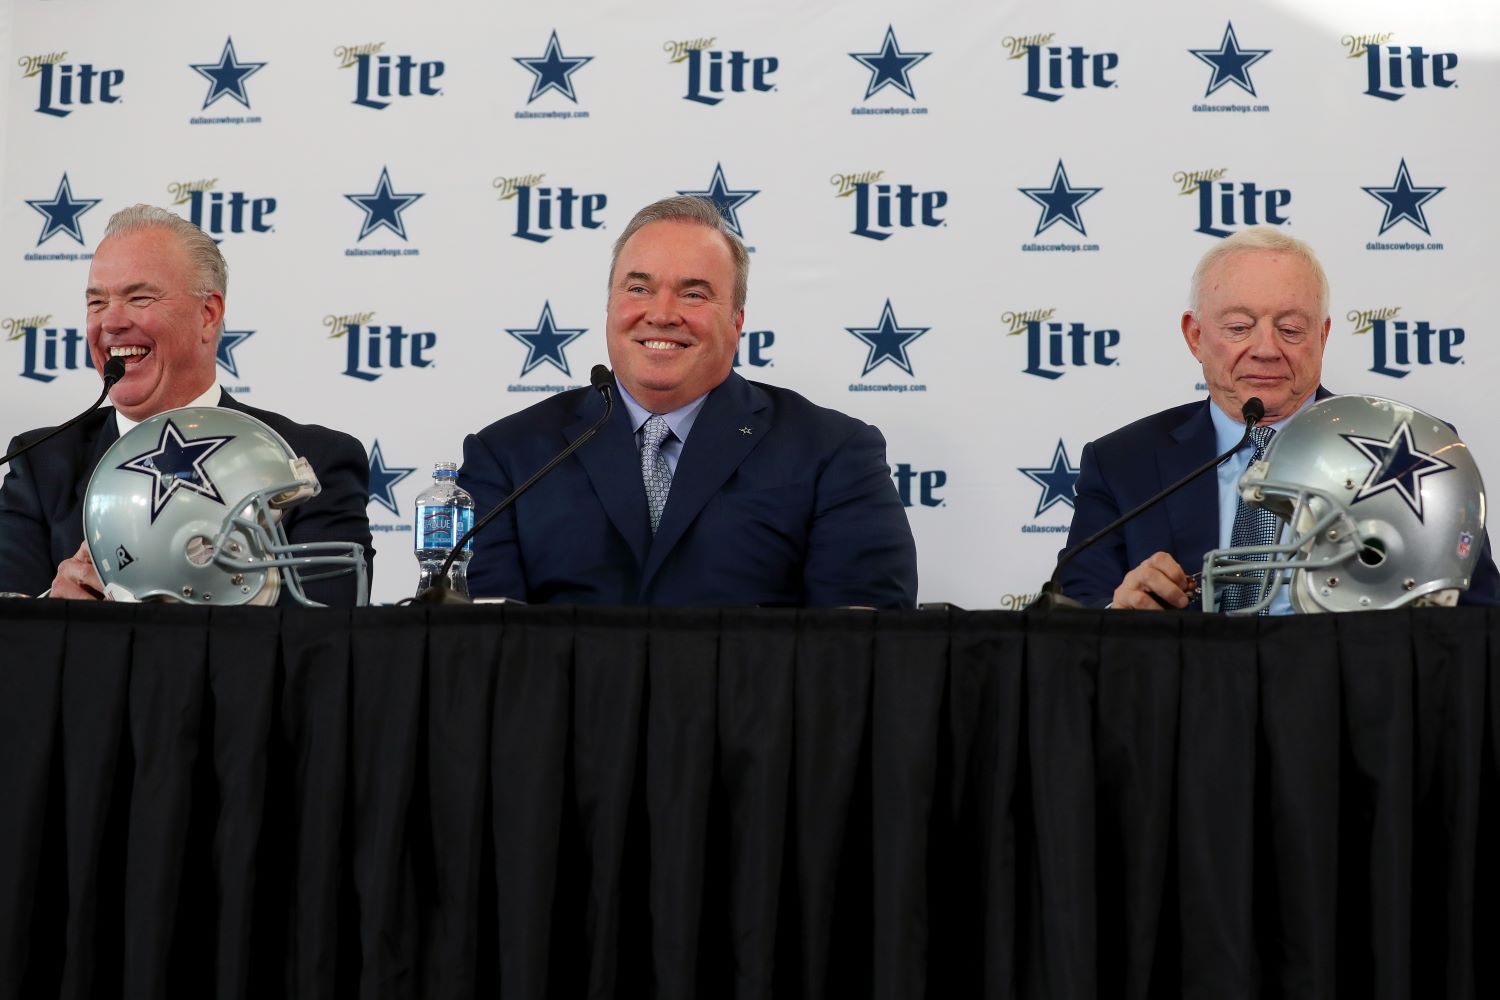 The Dallas Cowboys have already determined Mike McCarthy's fate, but will Jerry Jones change his mind by the end of the season?